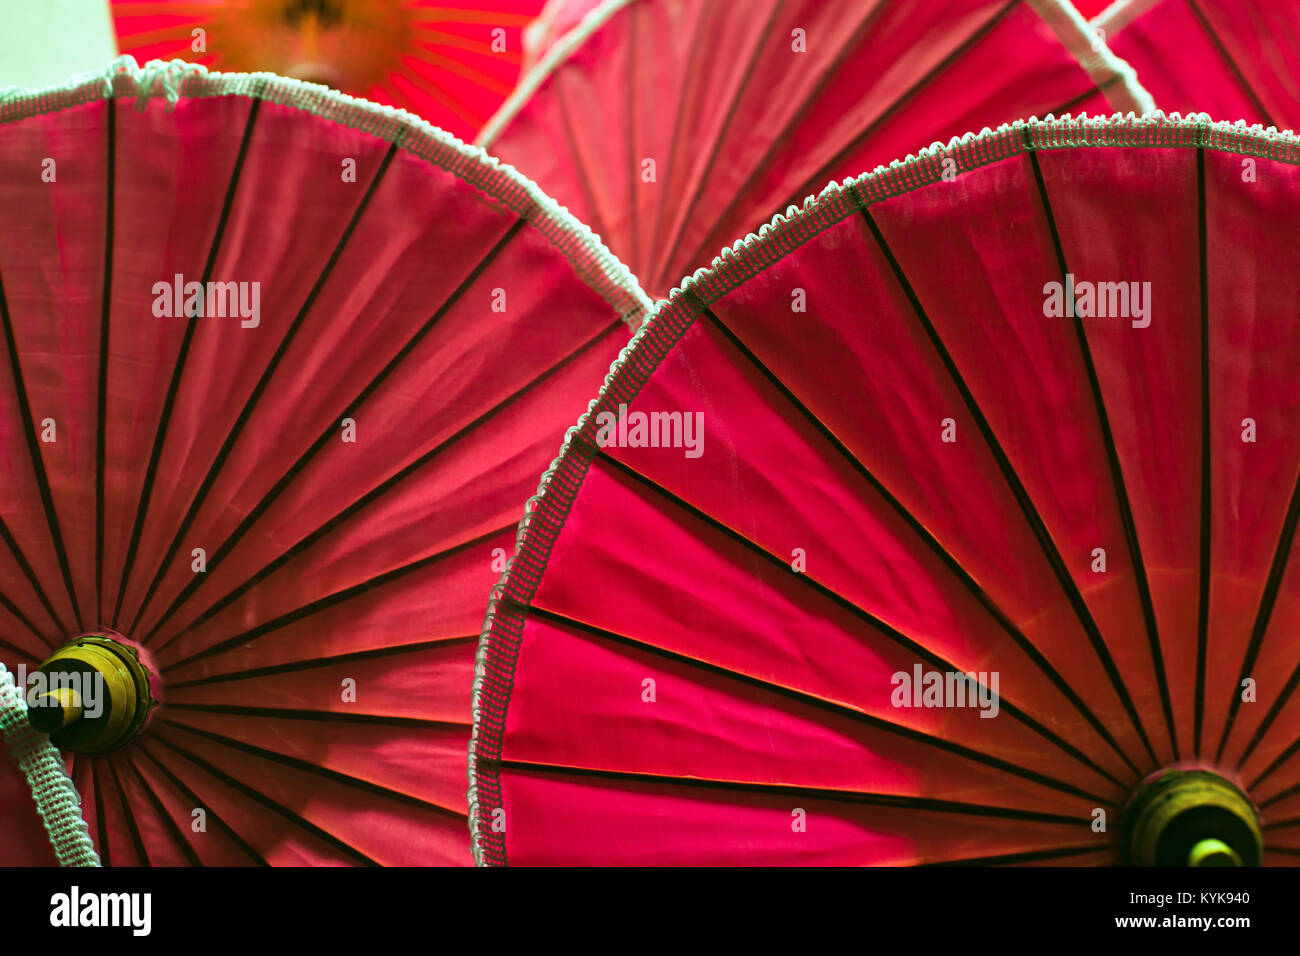 red color umbrellas close up, traditional asian craftsmanship in Chiangmai, Thailand Stock Photo